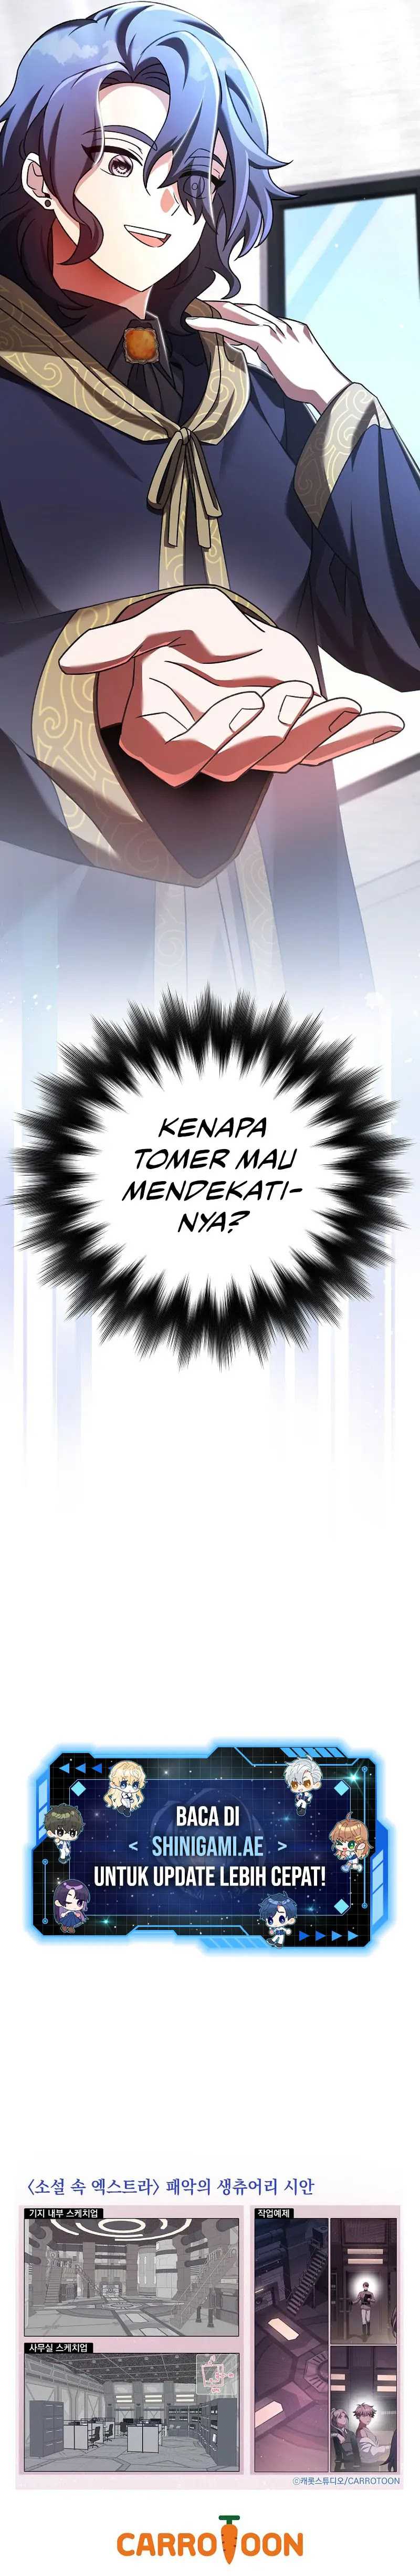 The Novel’s Extra (Remake) Chapter 85